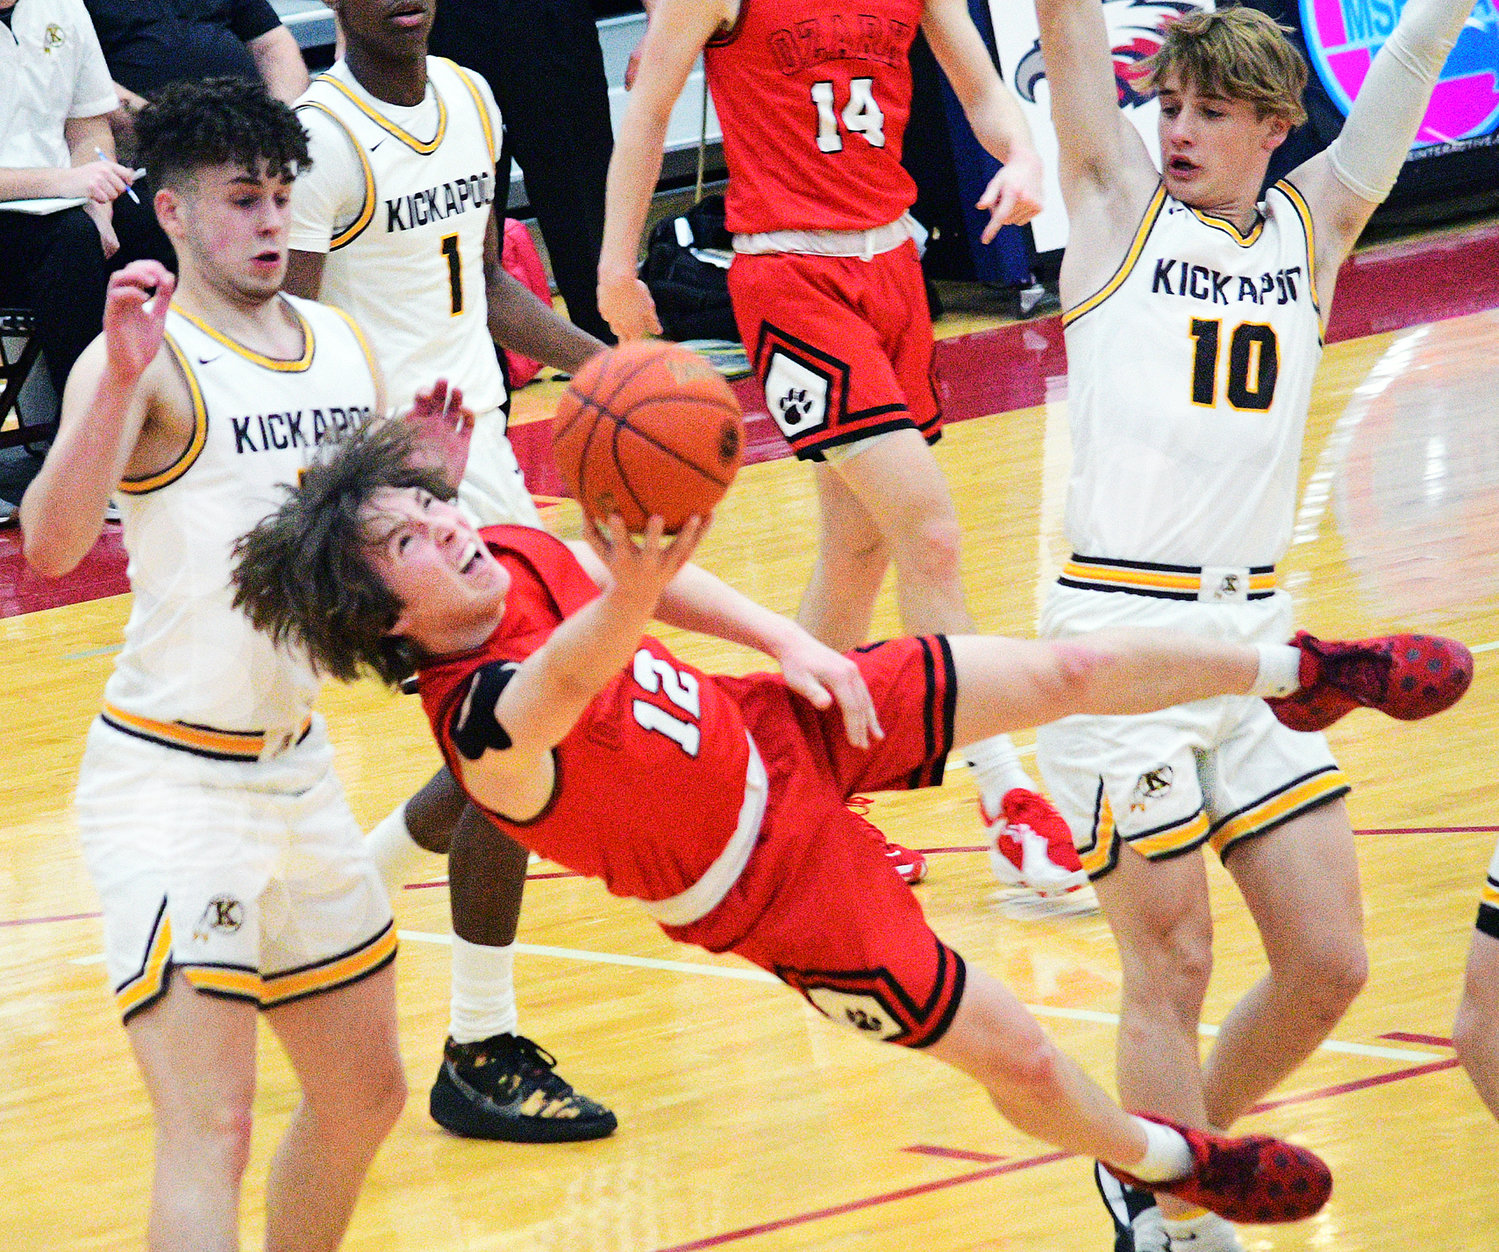 OZARK’S COLTON BALLARD puts up a shot in between two Kickapoo defenders Wednesday in Class 6 District 5 semifinal action.